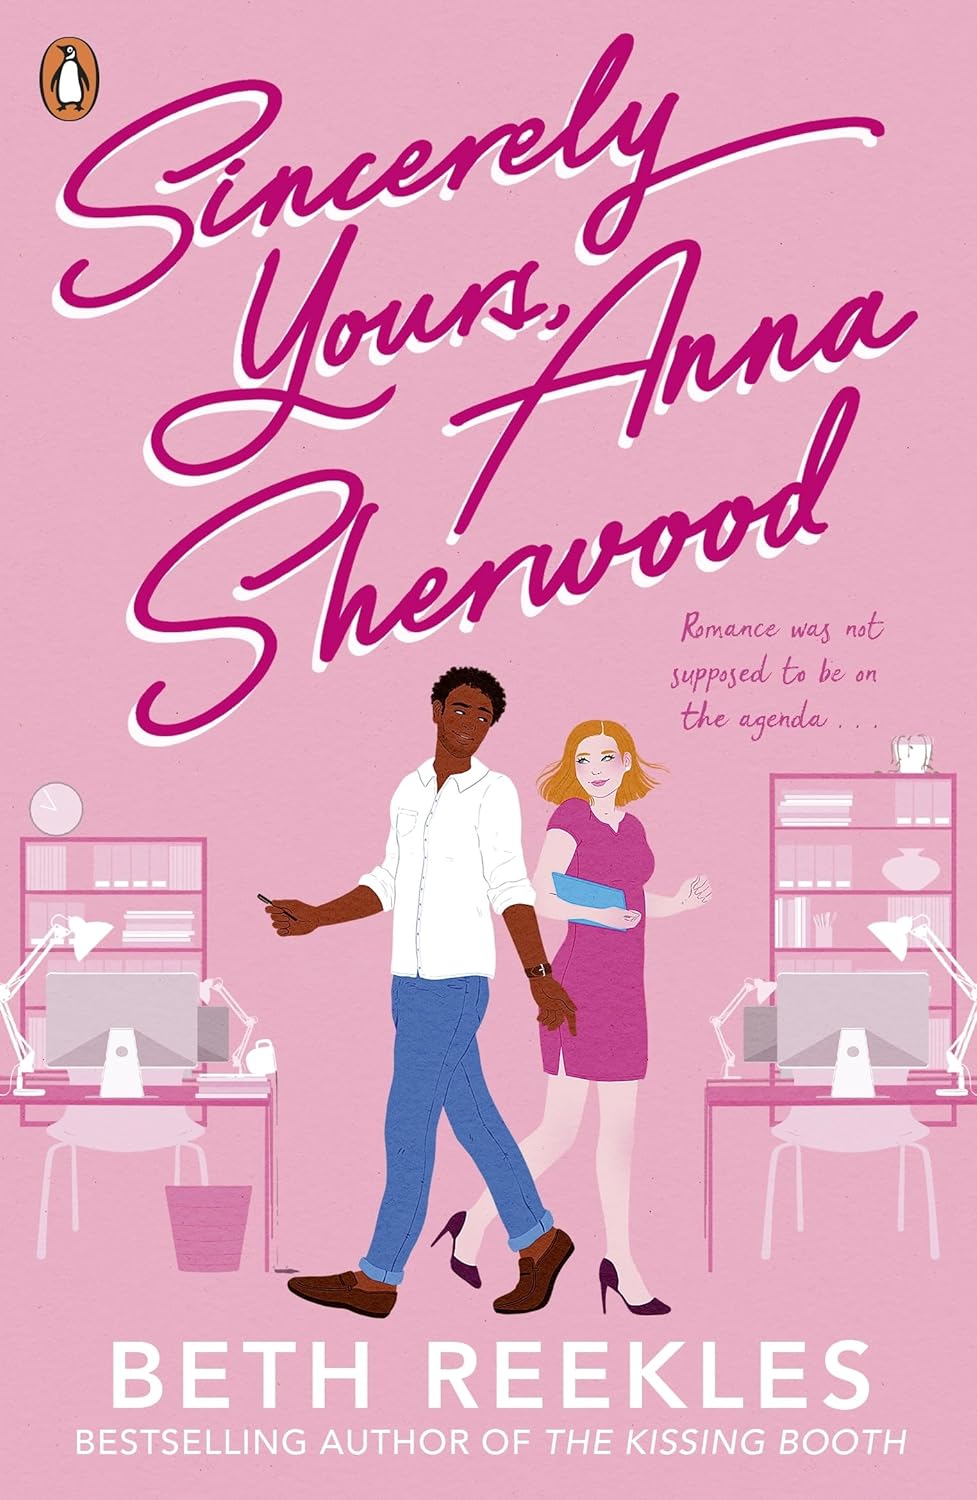 Sincerely Yours, Anna Sherwood | Beth Reekles